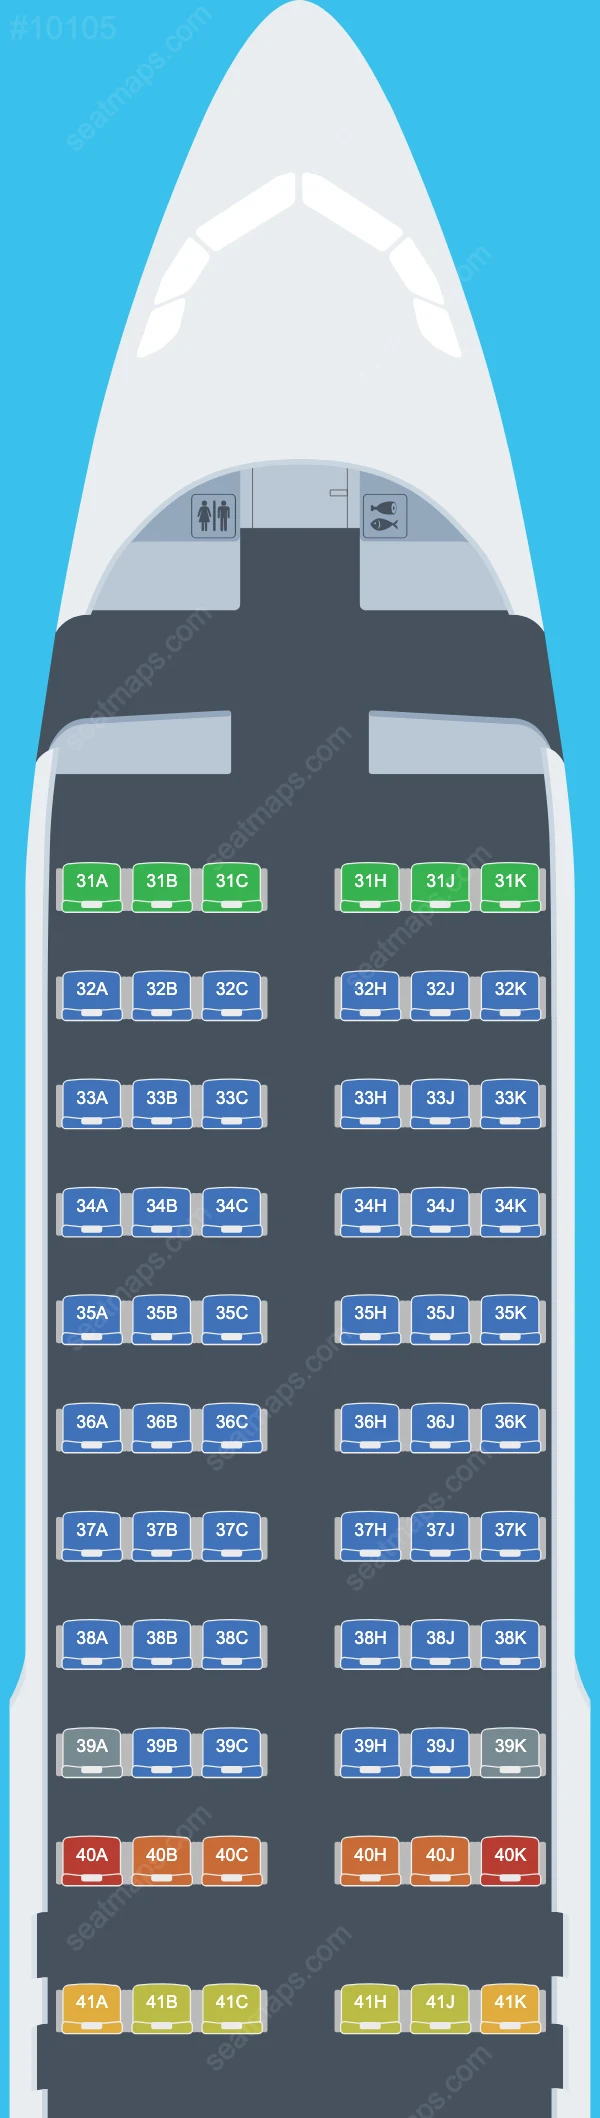 China Southern Airbus A320 Seat Maps A320-200 V.8